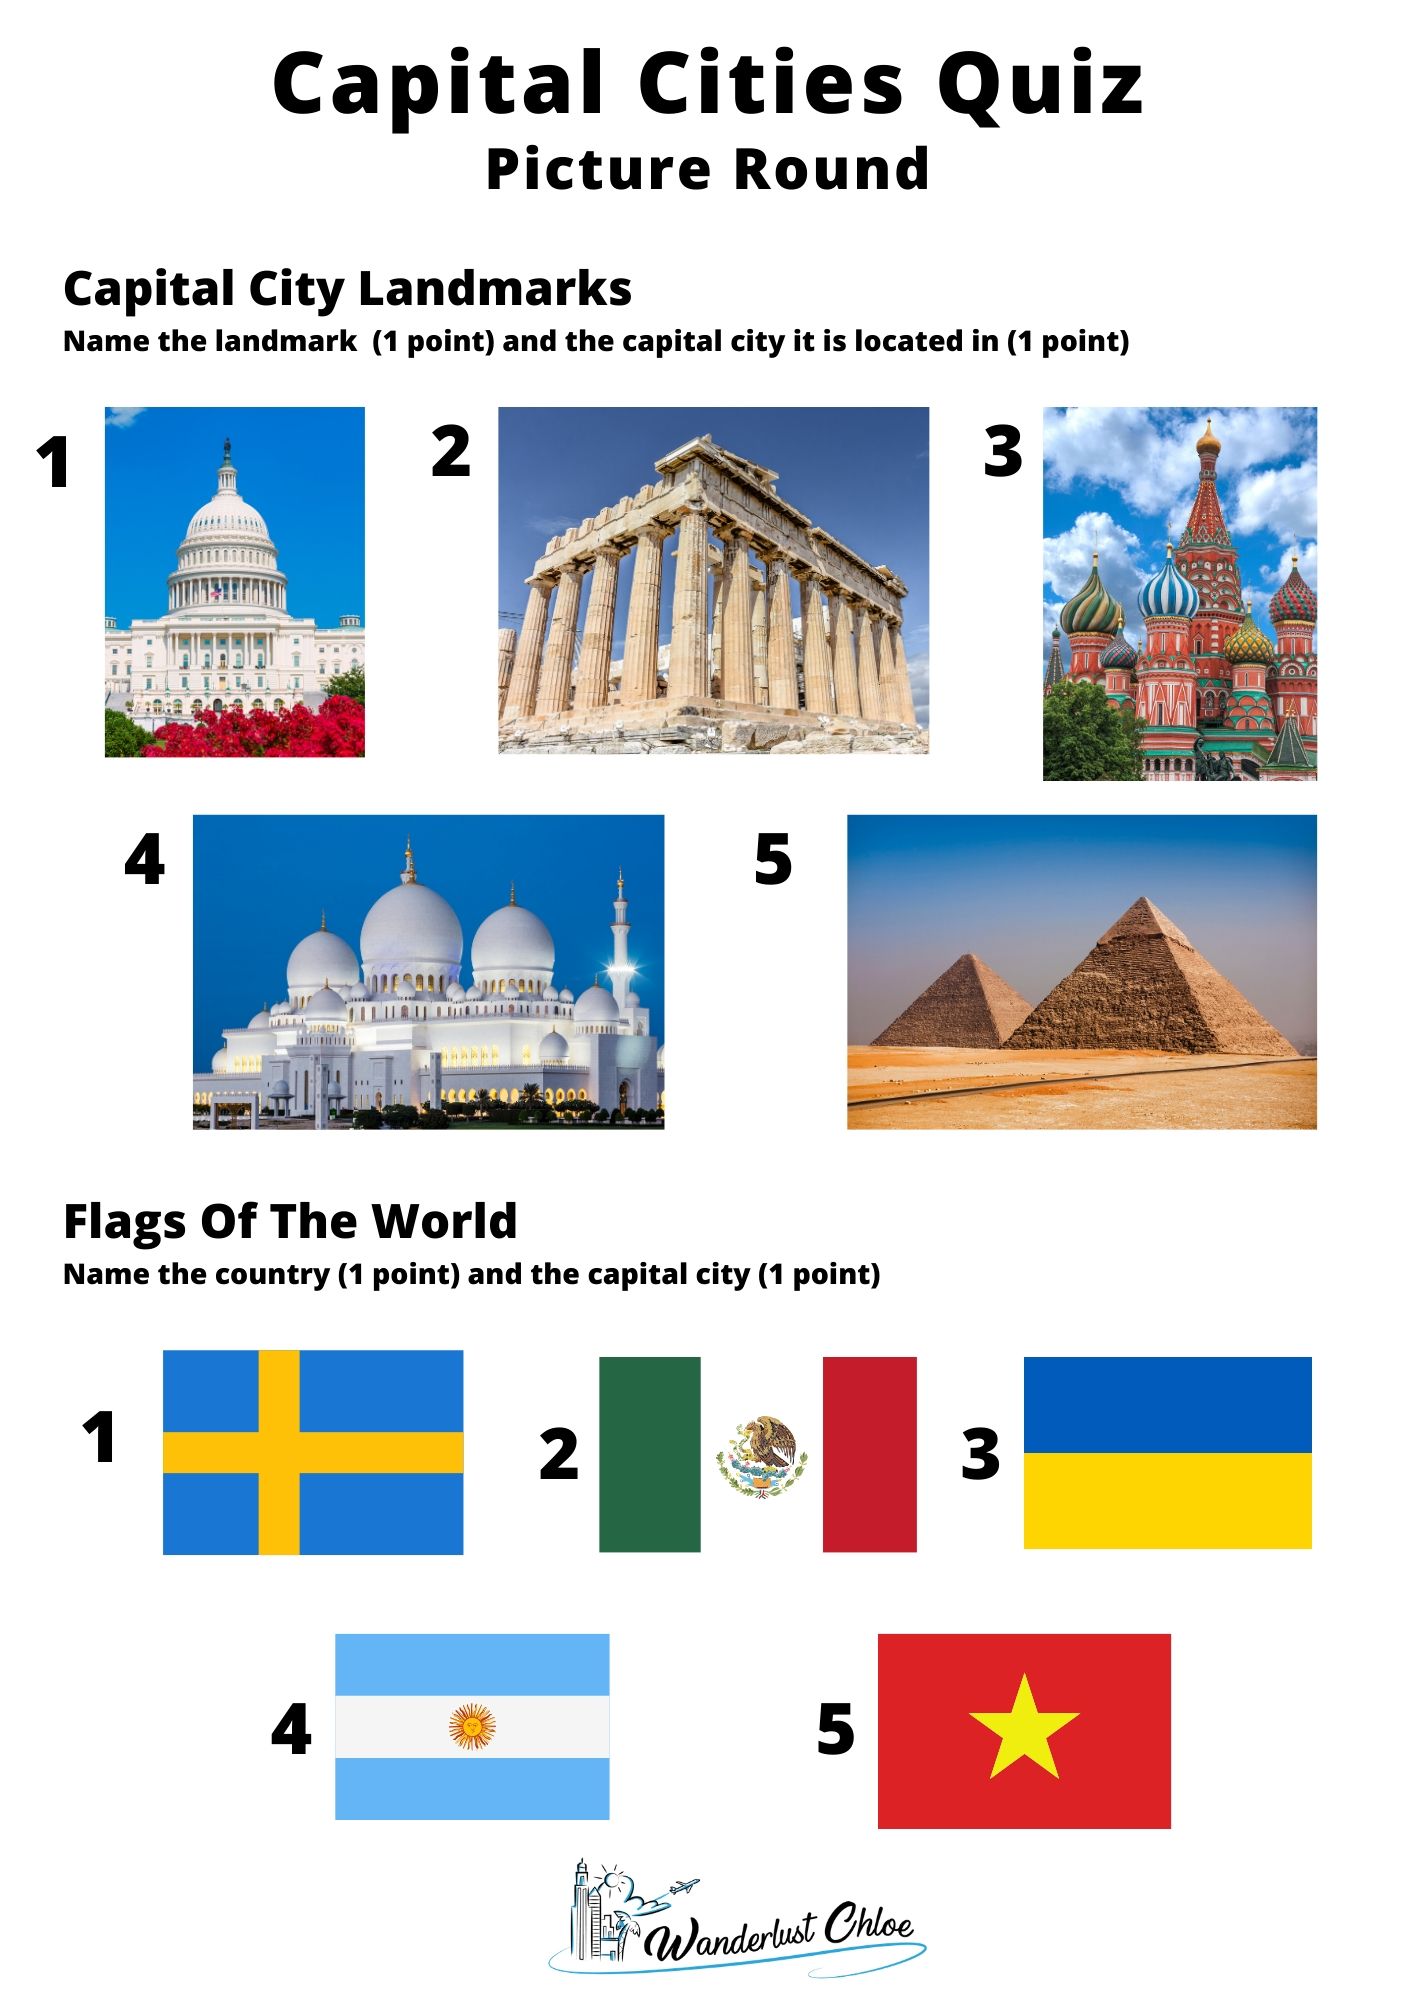 Capital cities quiz questions and answers - picture round